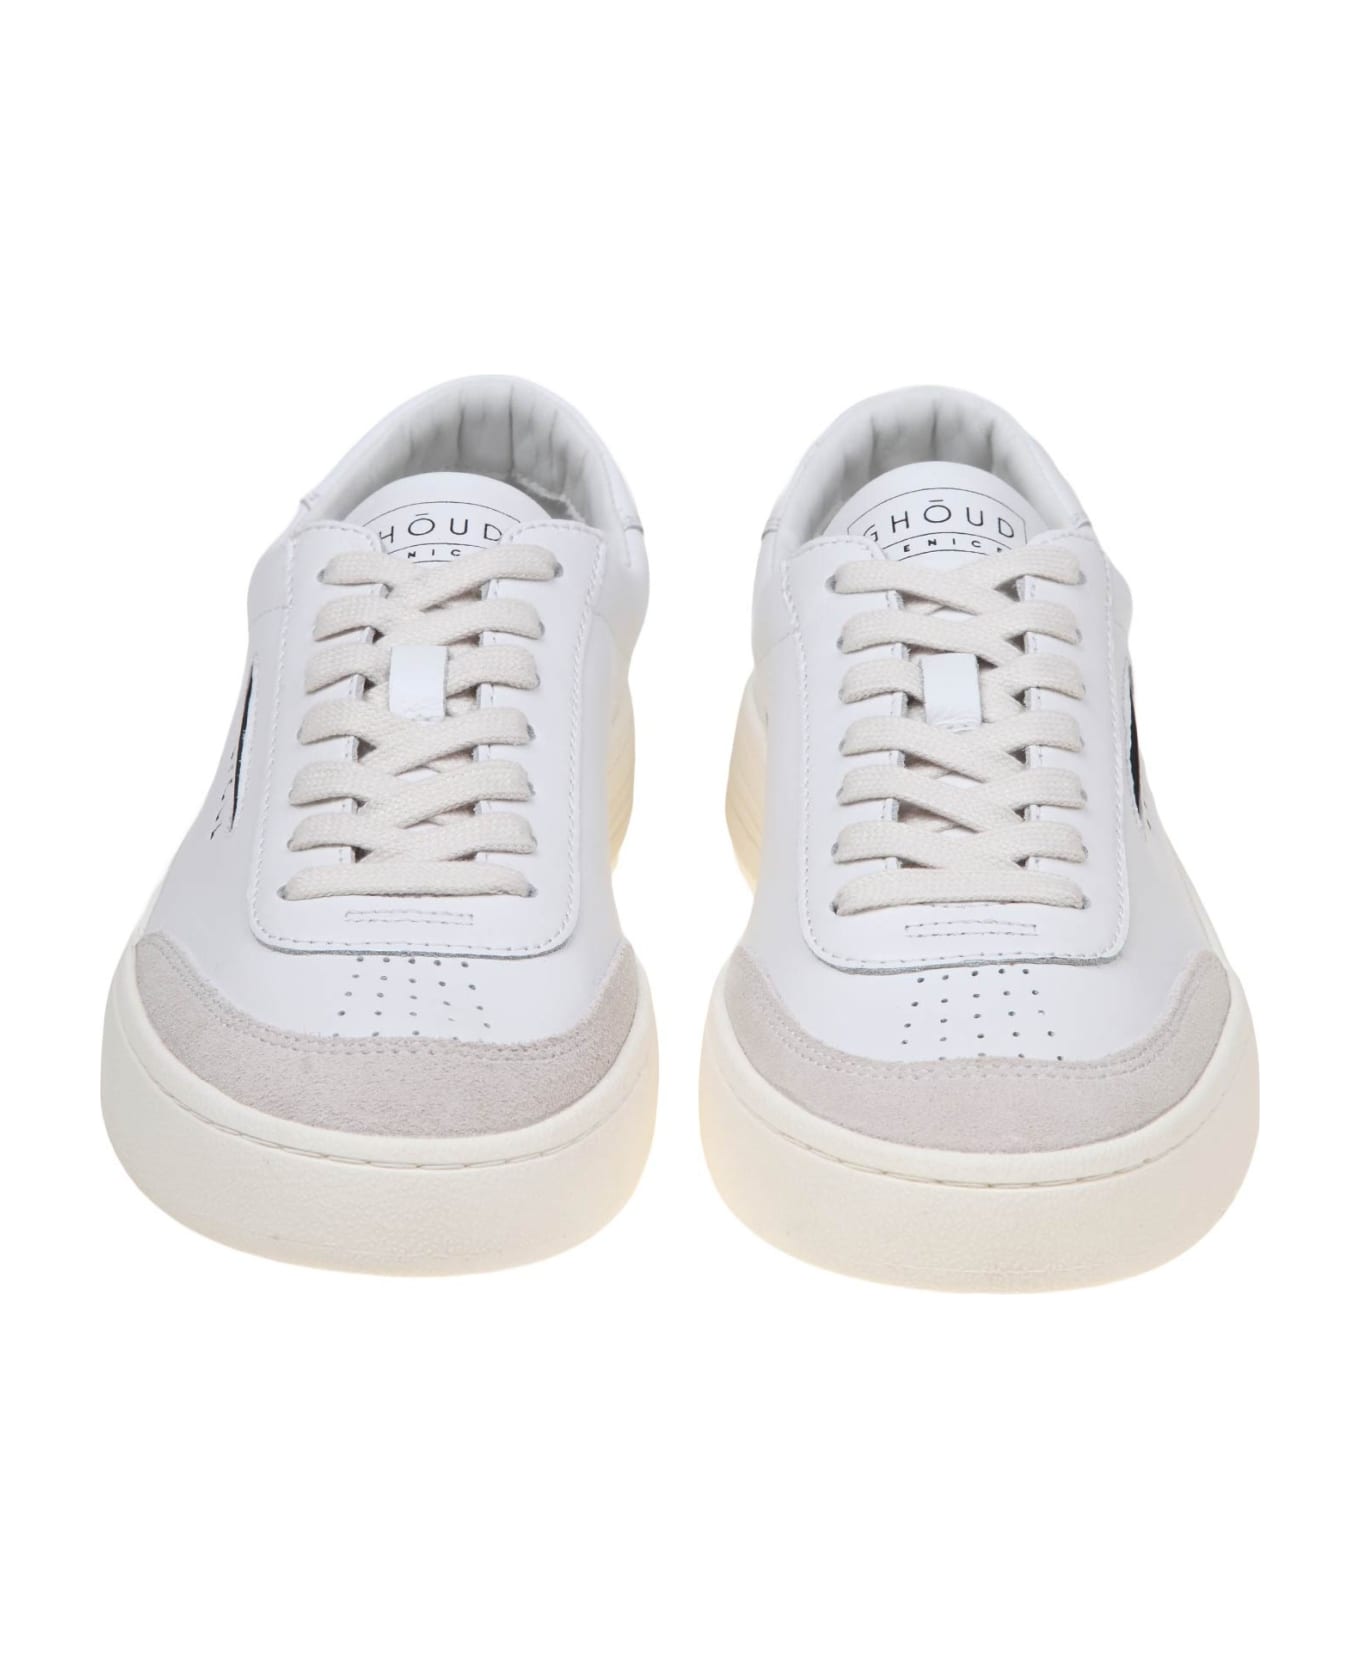 GHOUD Lido Low Sneakers In White Leather And Suede - LEAT/SUEDE WHITE スニーカー